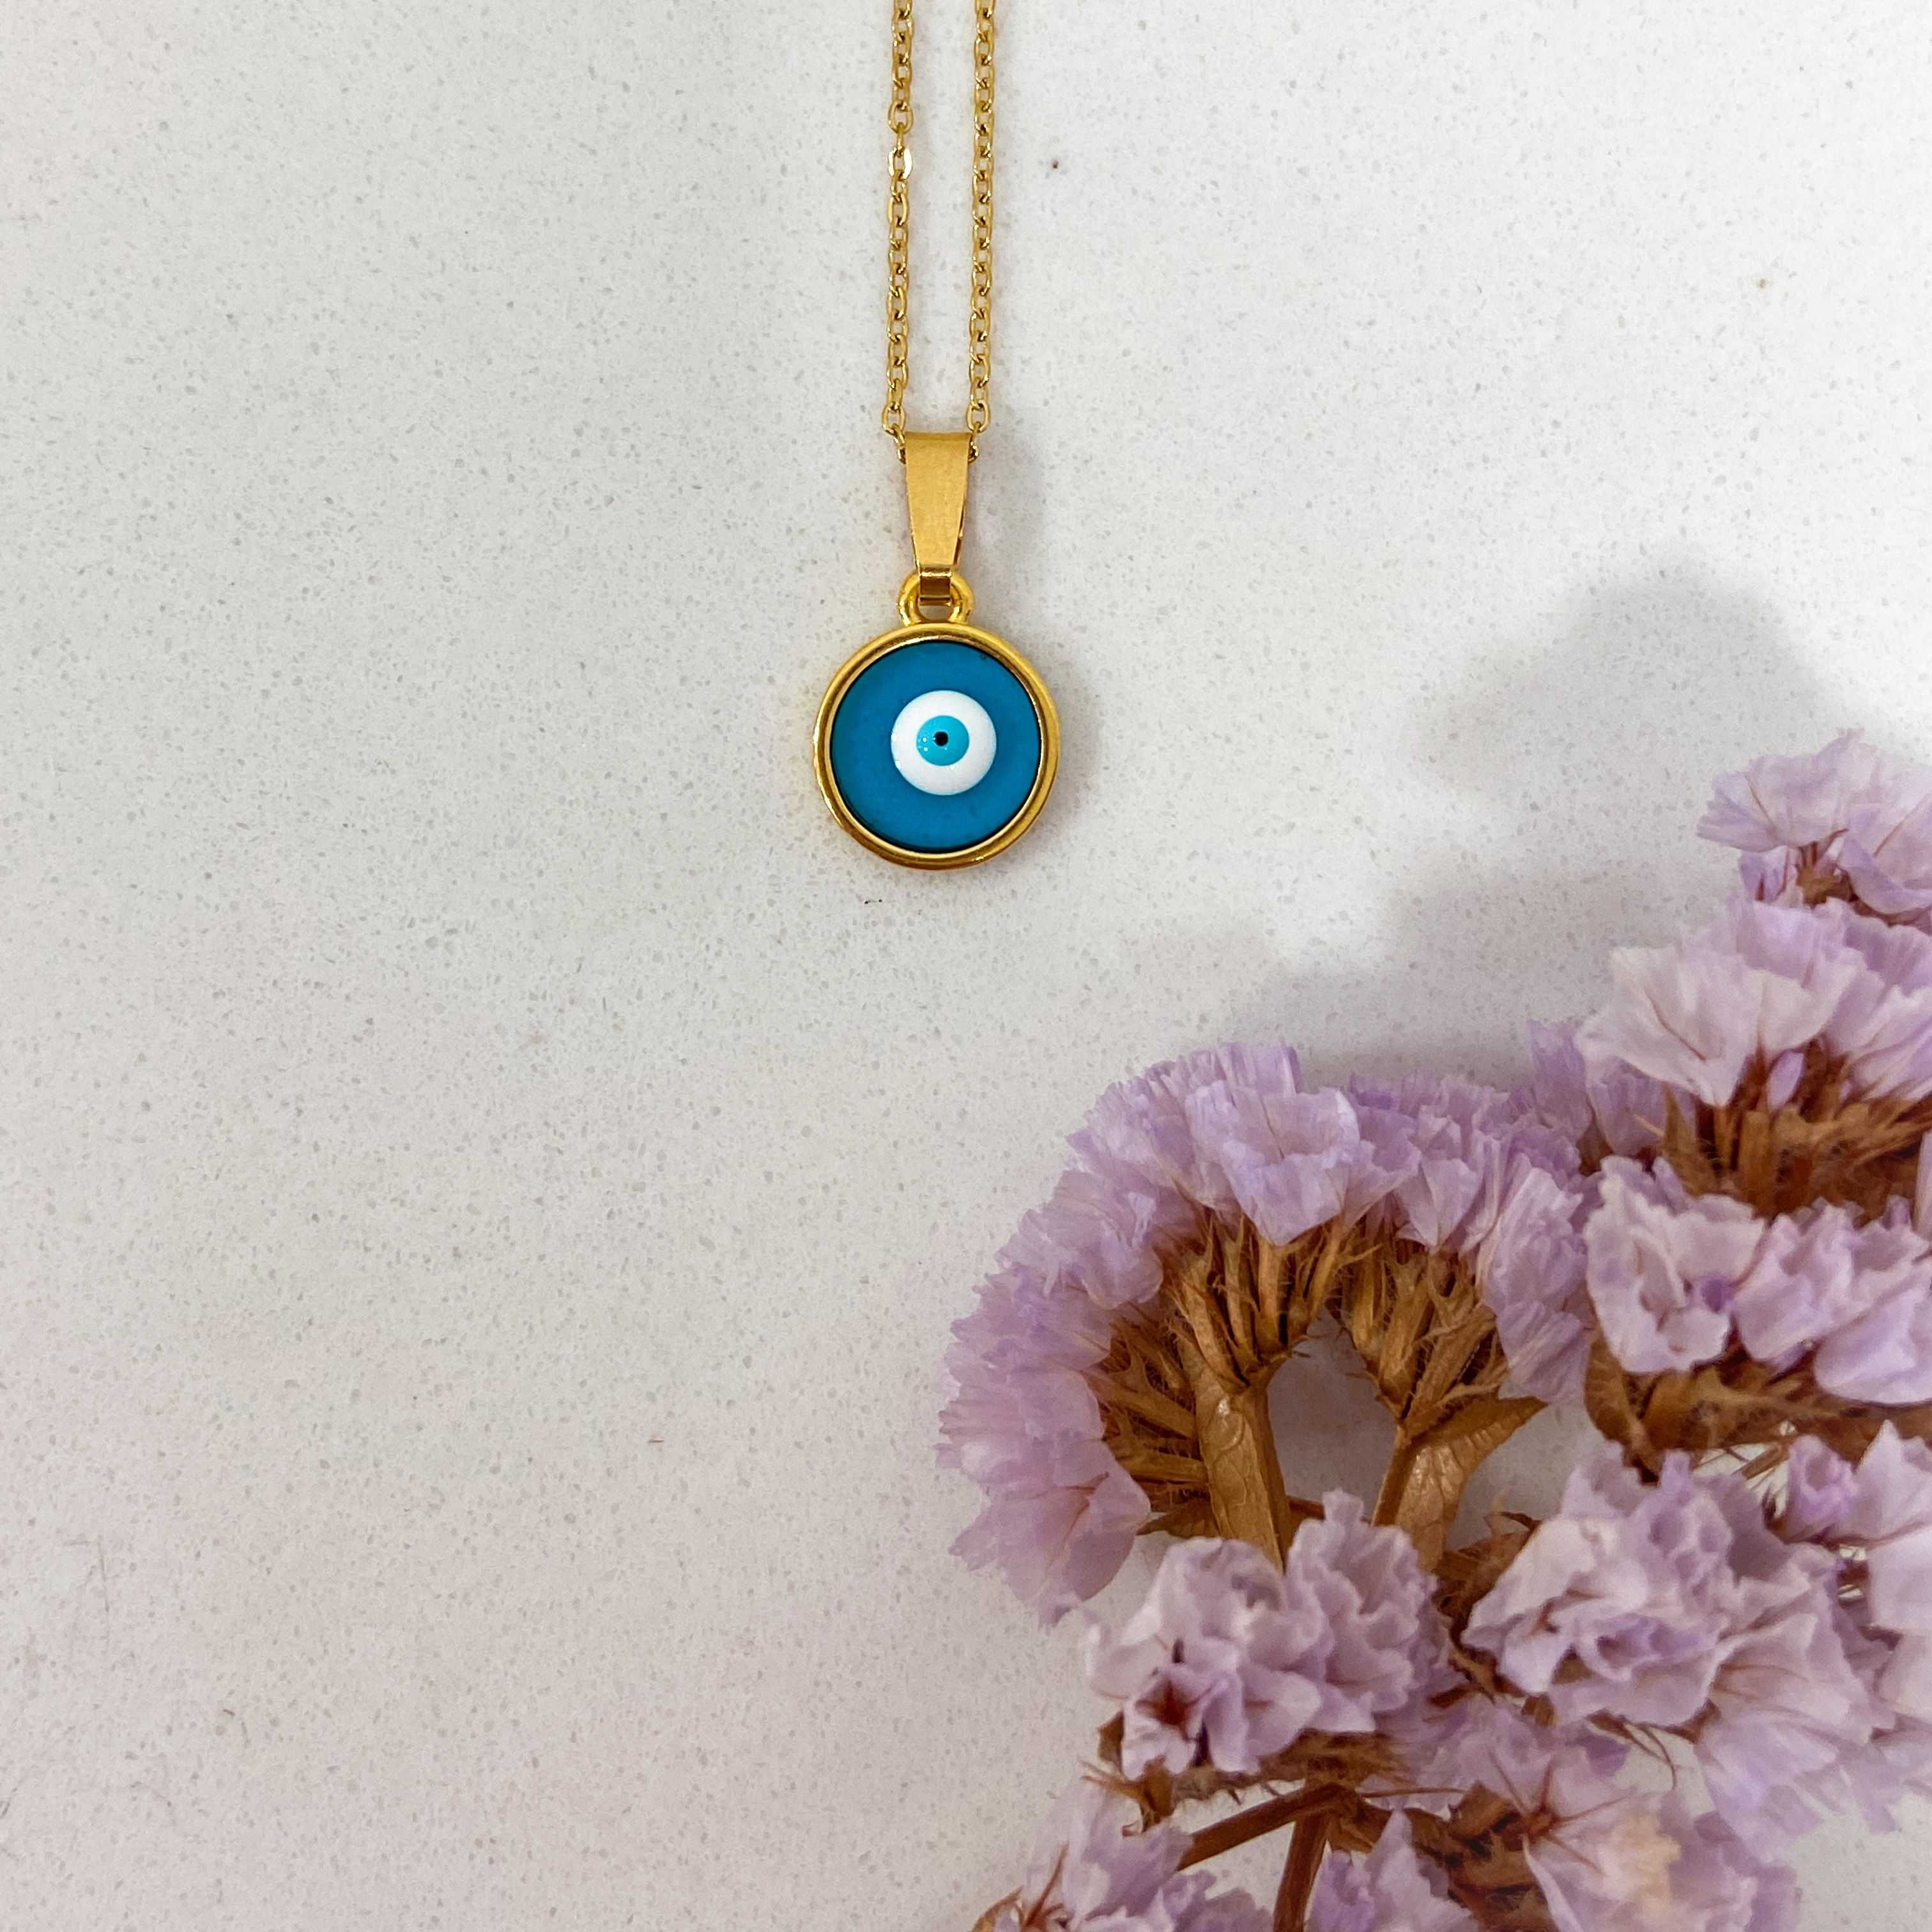 LUCKY CHARM NECKLACE - GOLD & TURQUOISE